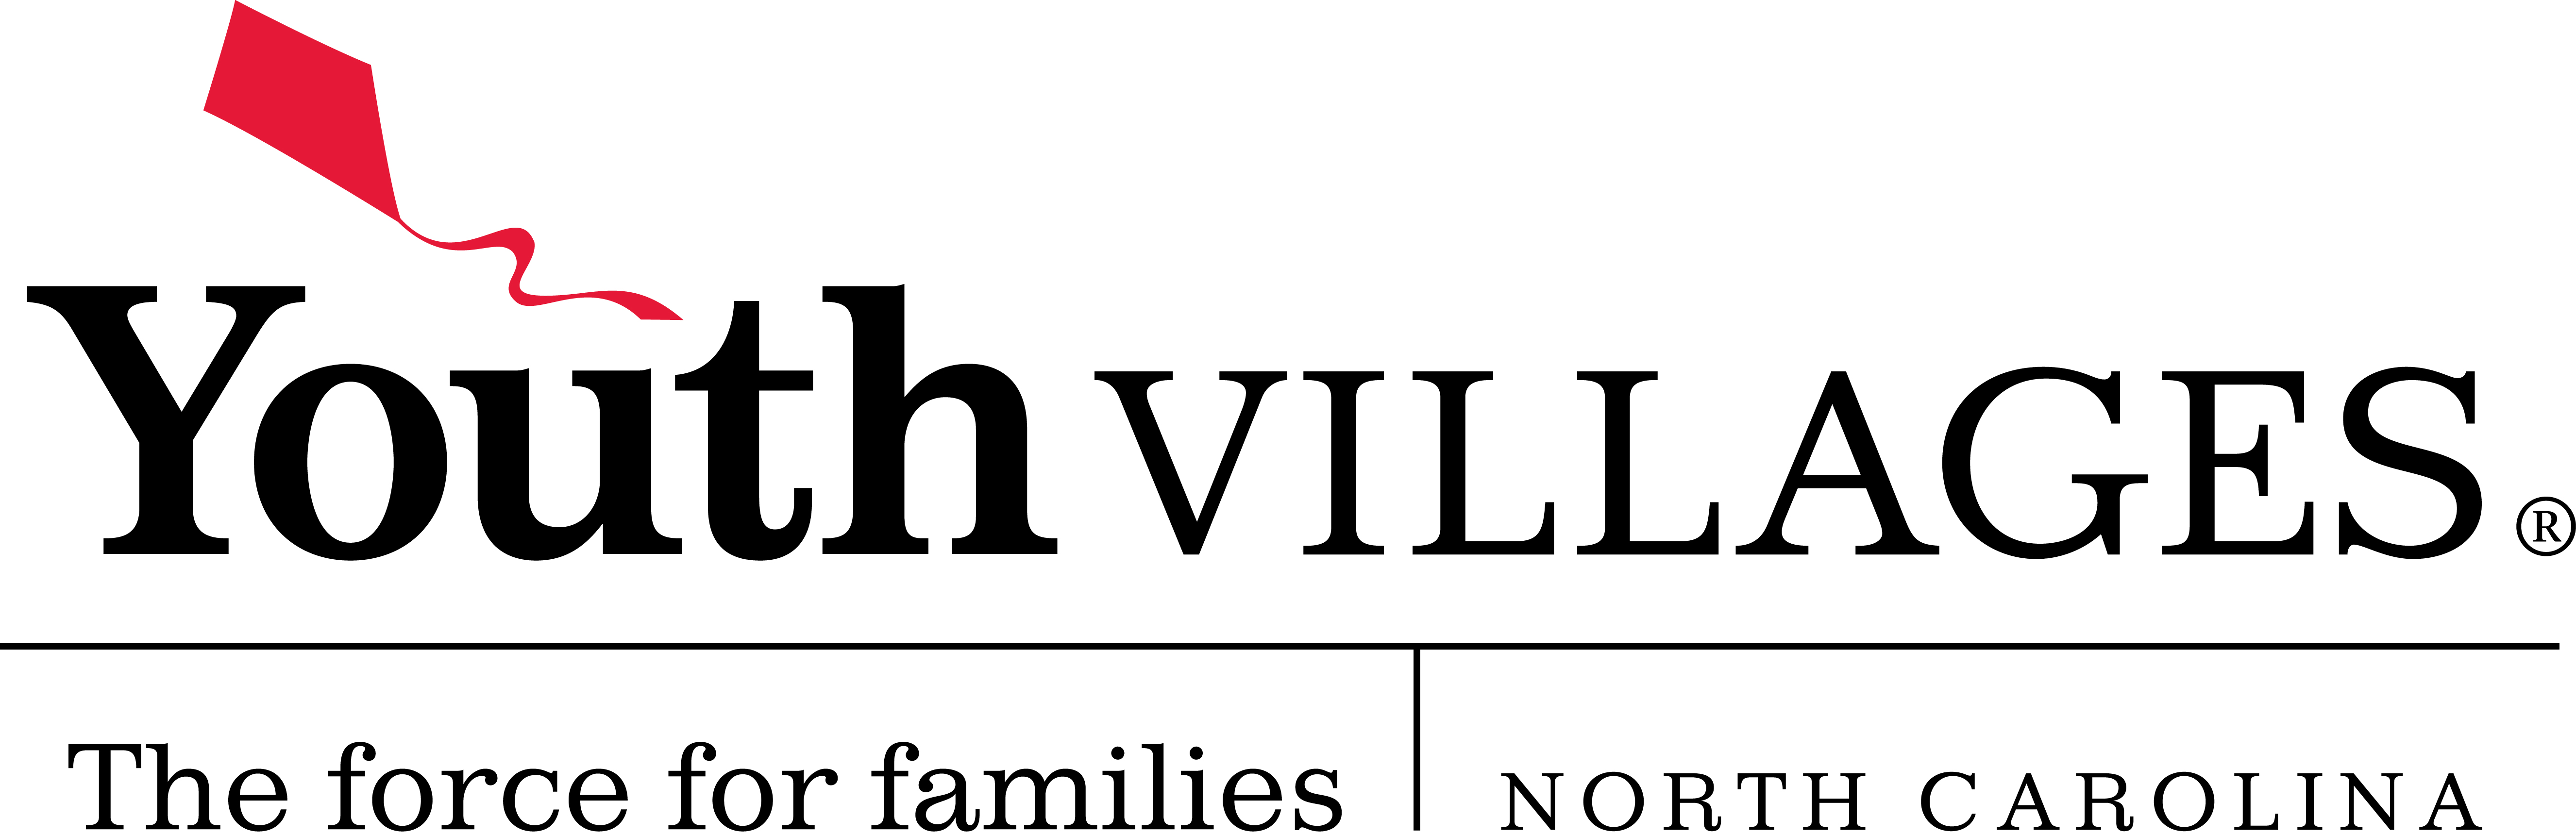 Youth Villages | The Force for Families